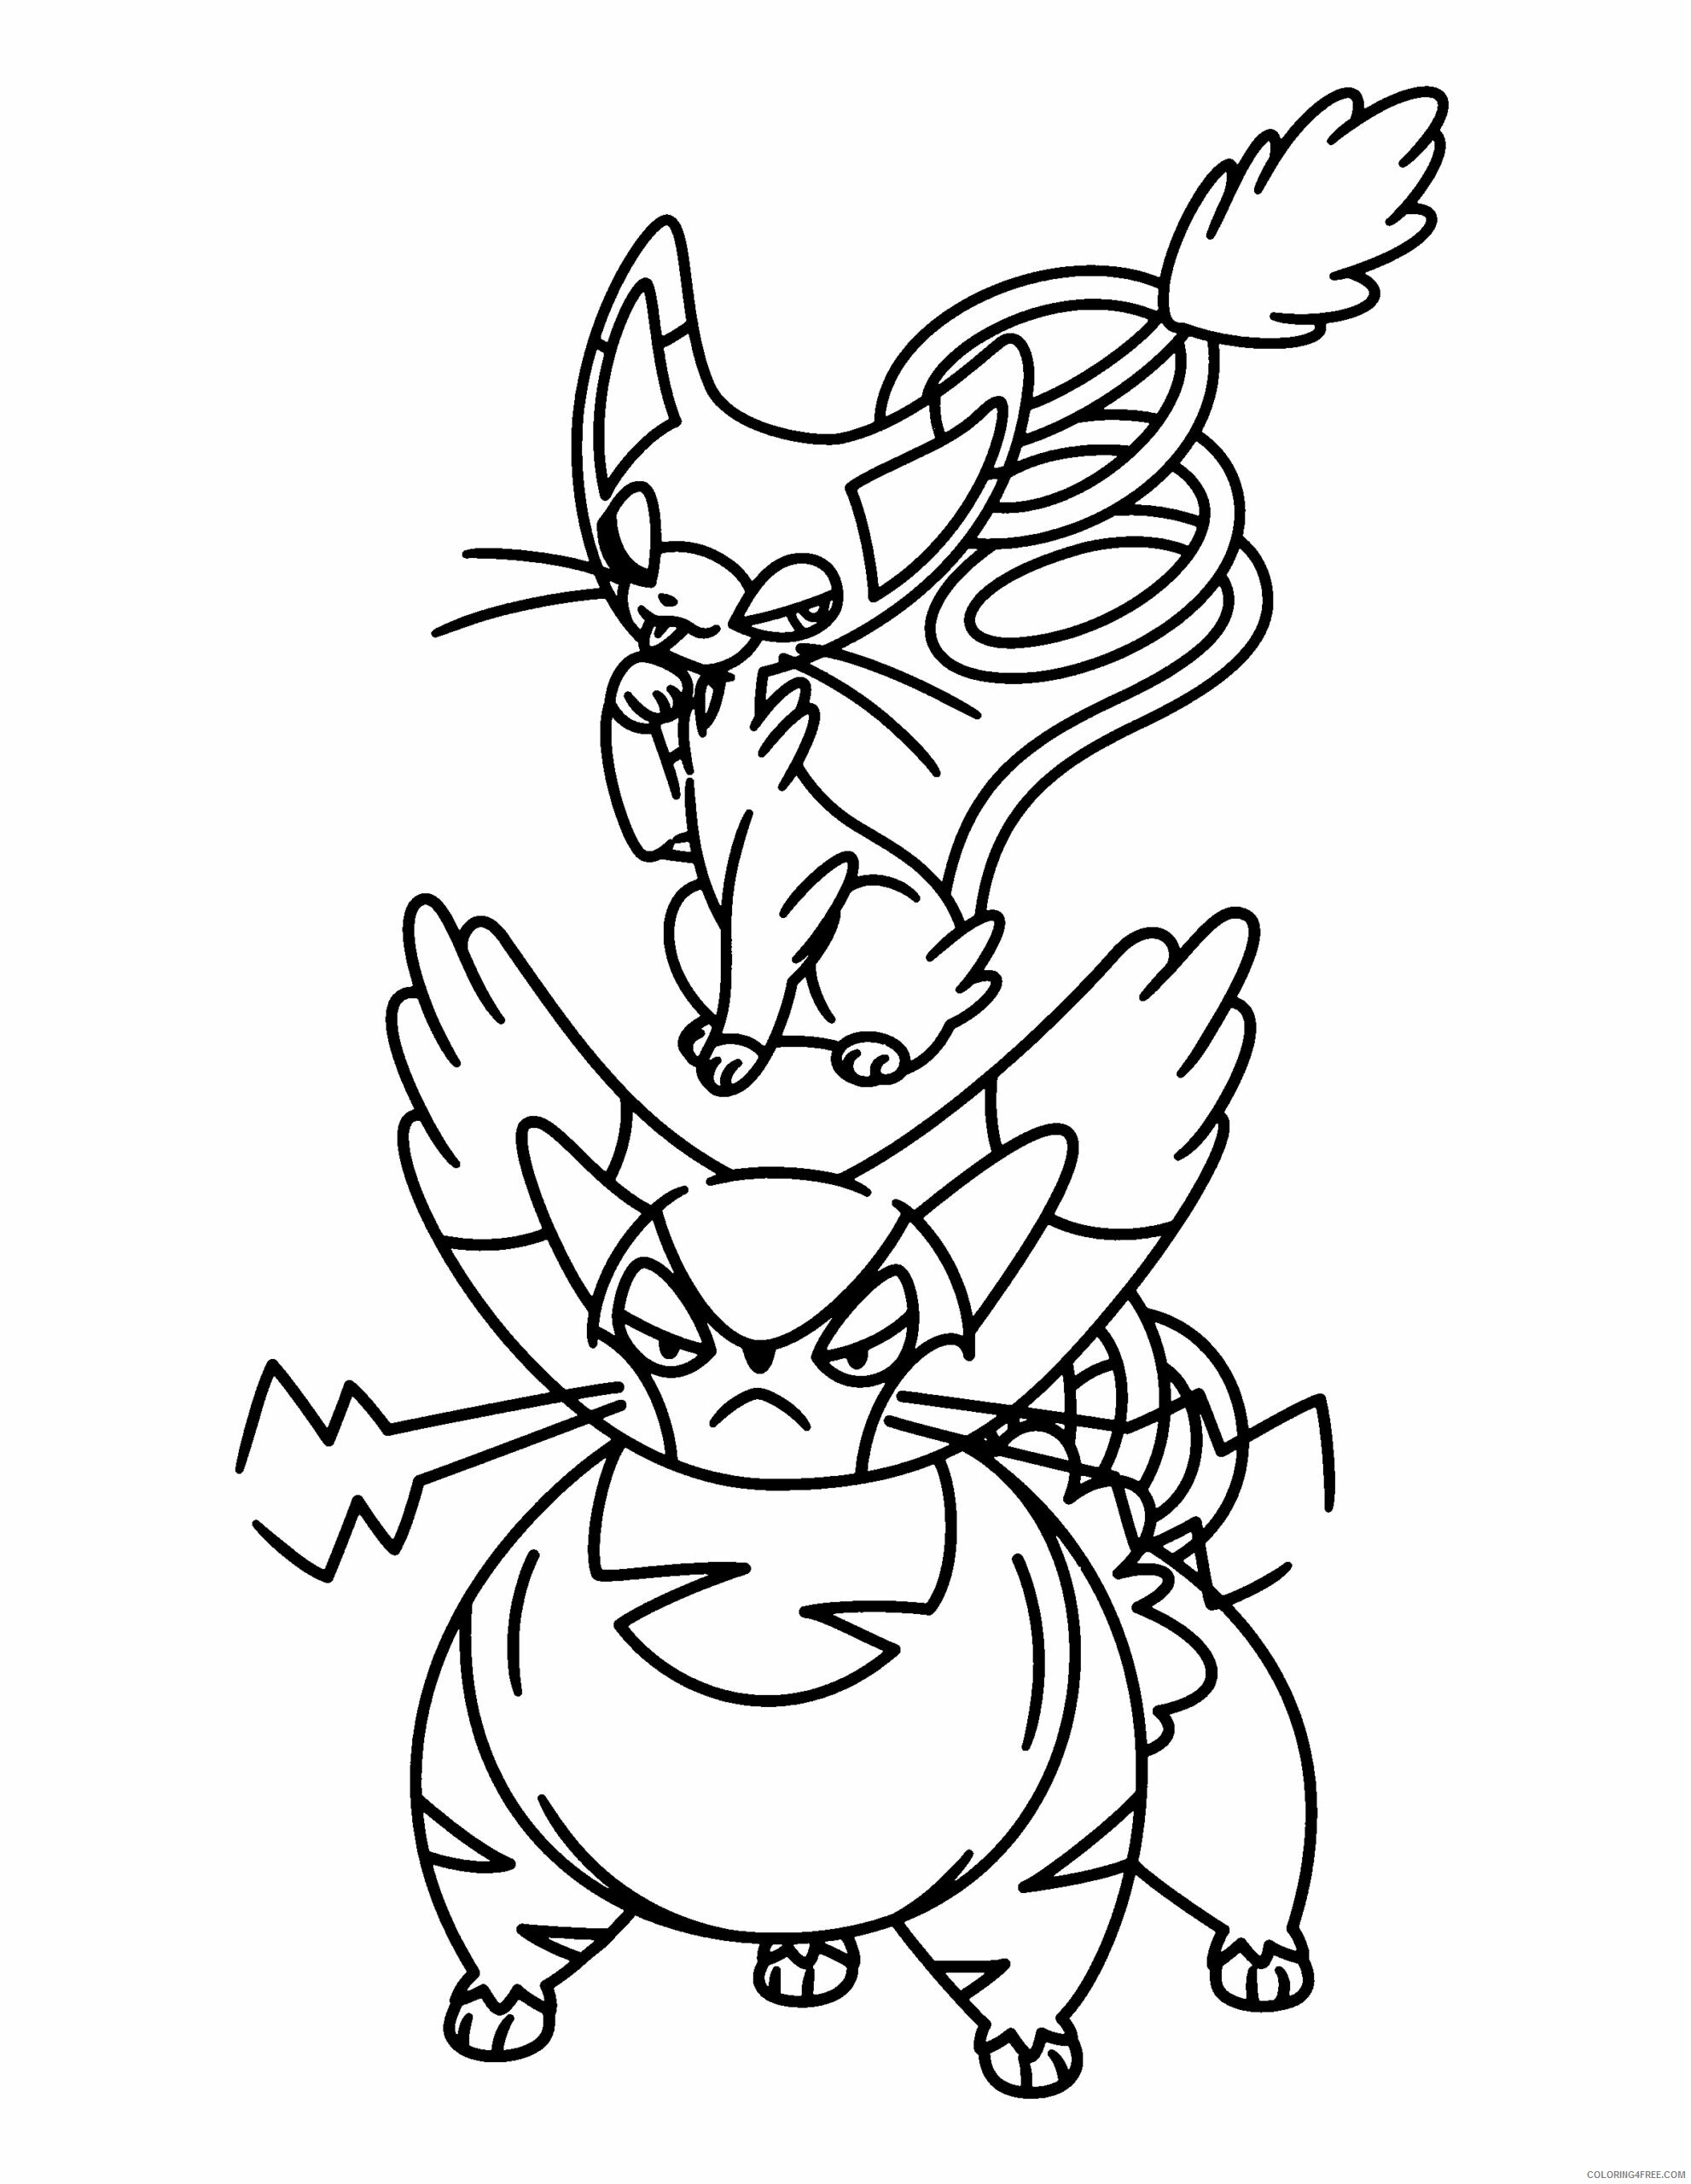 Pokemon Diamond and Pearl Coloring Pages Games Printable 2021 0888 Coloring4free